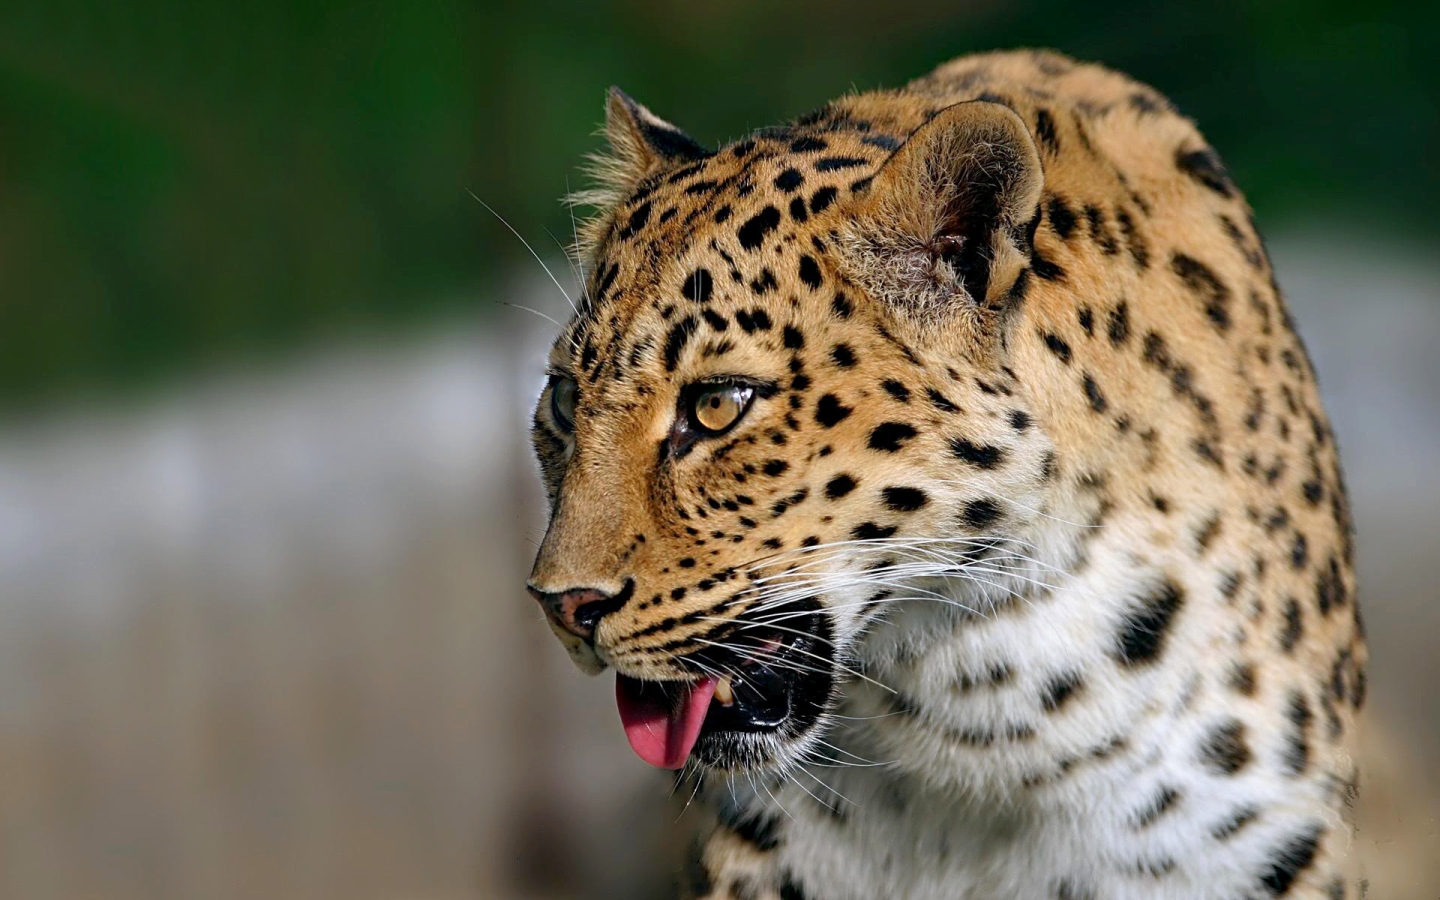 Download wallpaper for 240x320 resolution | Leopard Tongue HD | animals ...